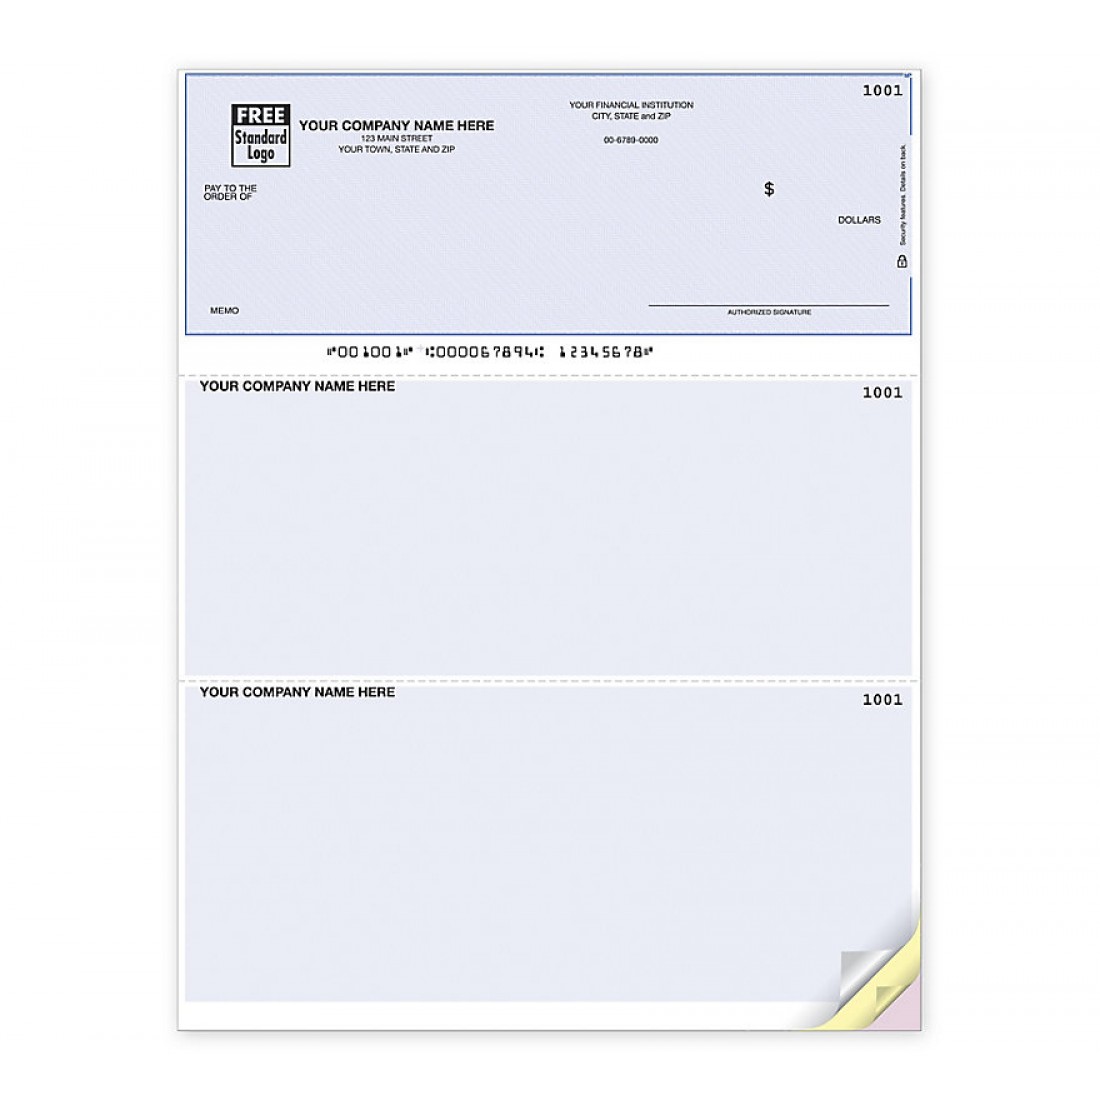 Laser Bottom Blank Check (DLB833) for All Purposes - by Deluxe